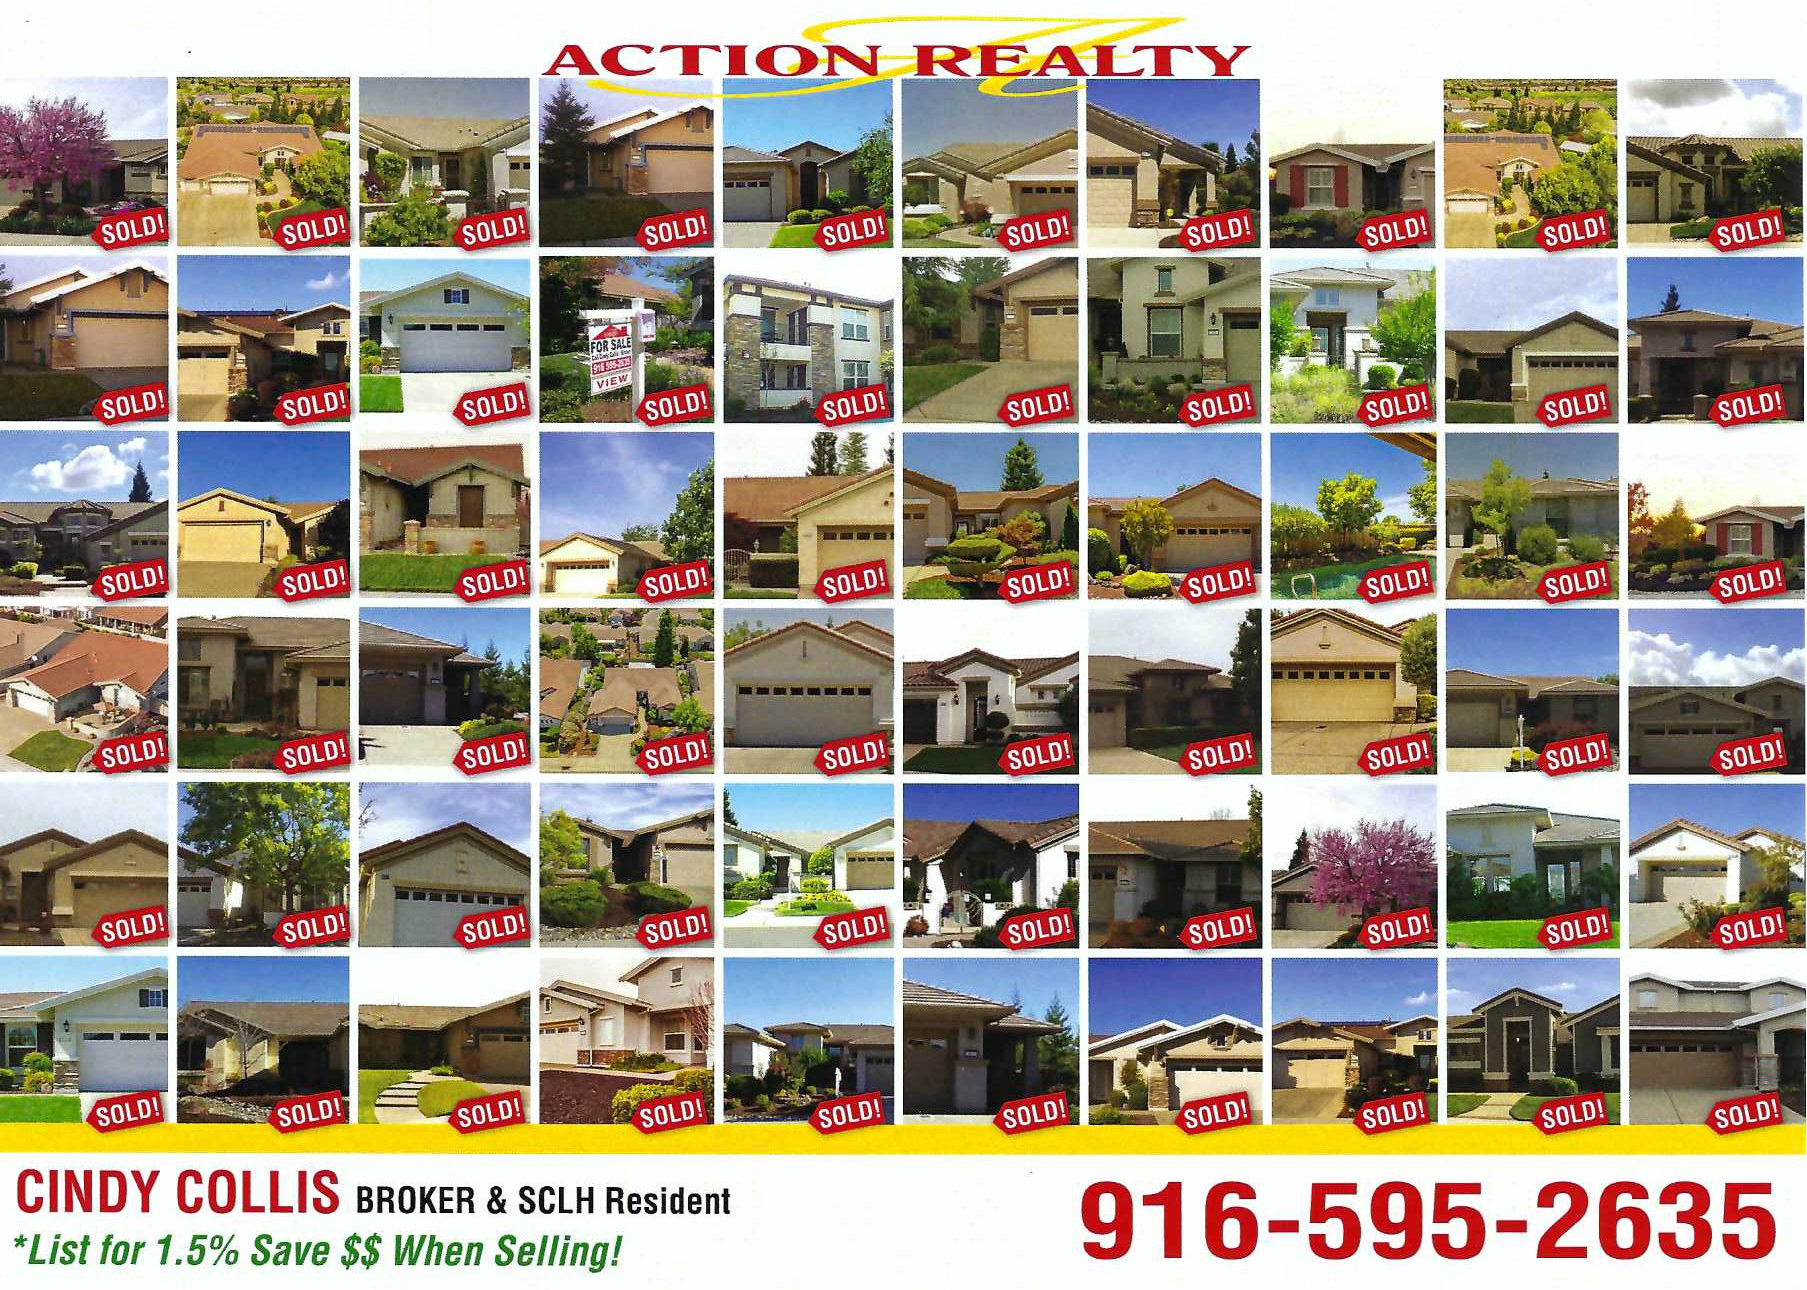 Action Realty - Display of all listings that have been sold by Cindy Collis. Phone 916-595-2635